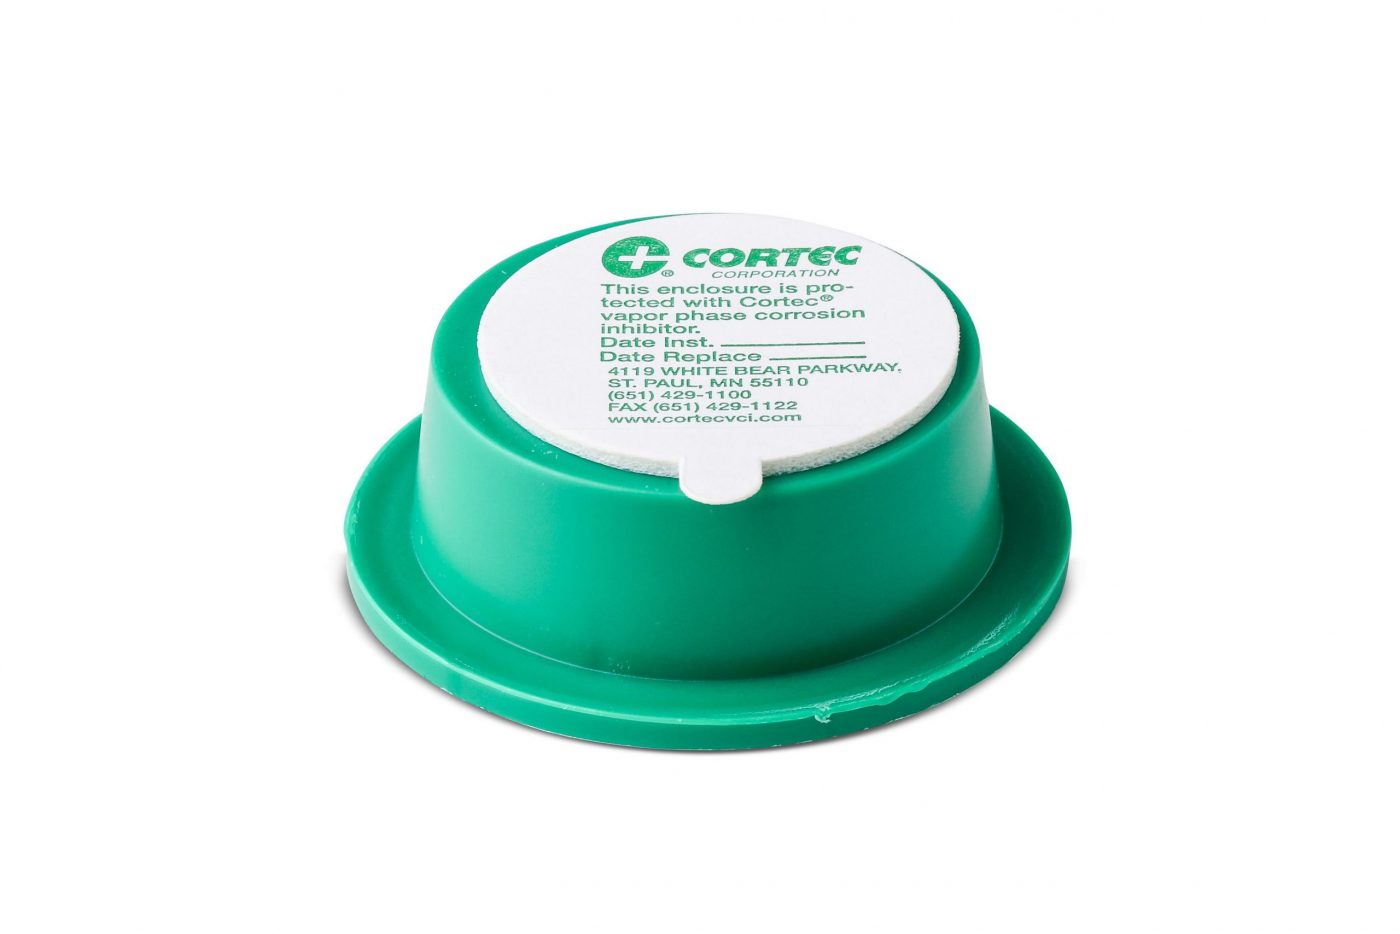 Cortec VpCI® 105 Patented Emitters With Breathable Membrane Valdamarkdirect.com